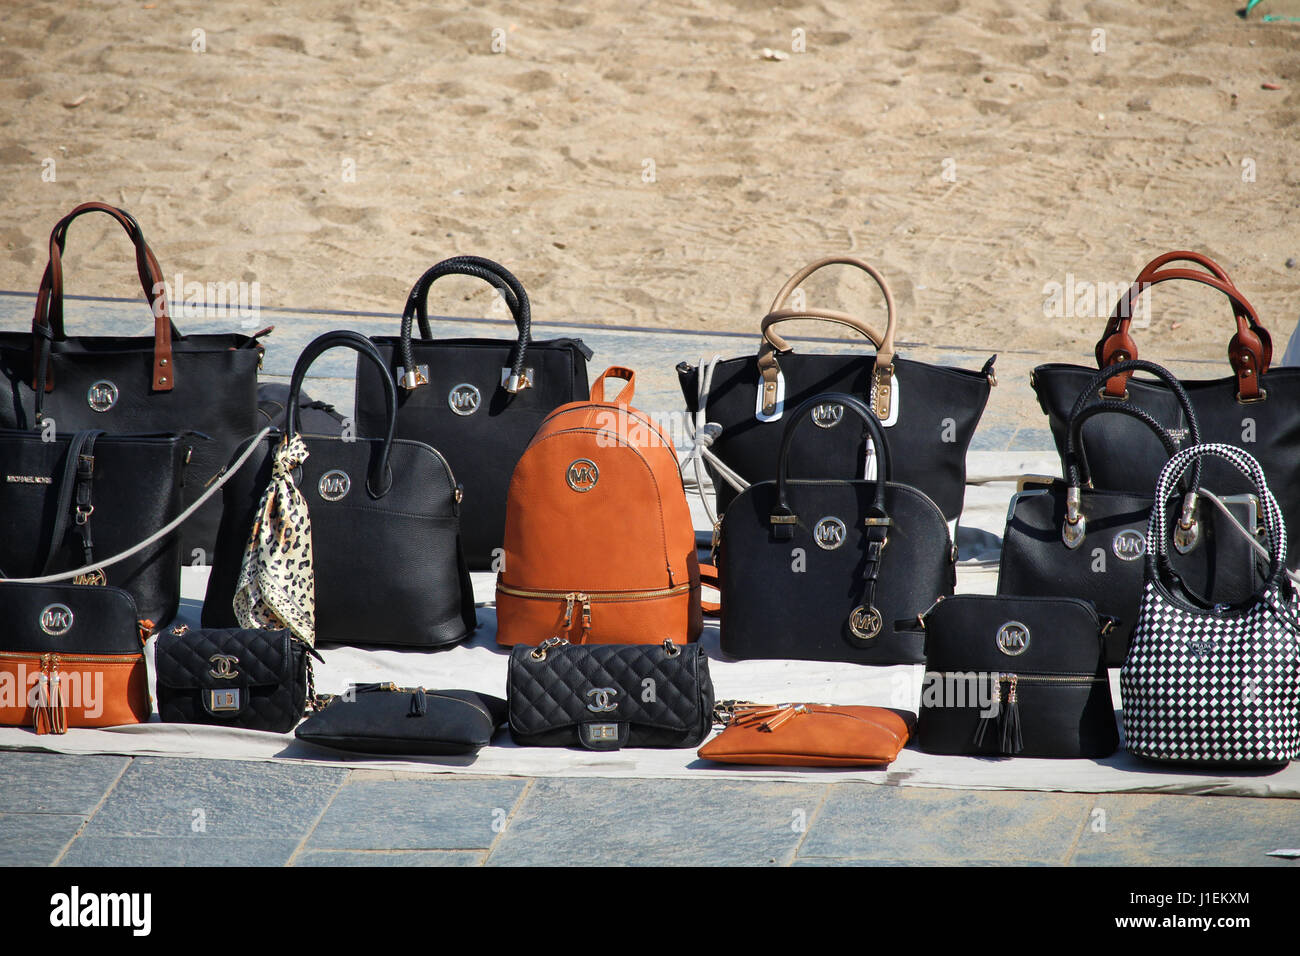 BARCELONA/SPAIN - 15 APRIL 2017: False branded leather bags such as Michael Kors and Chanel sold on Barceloneta beach Stock Photo